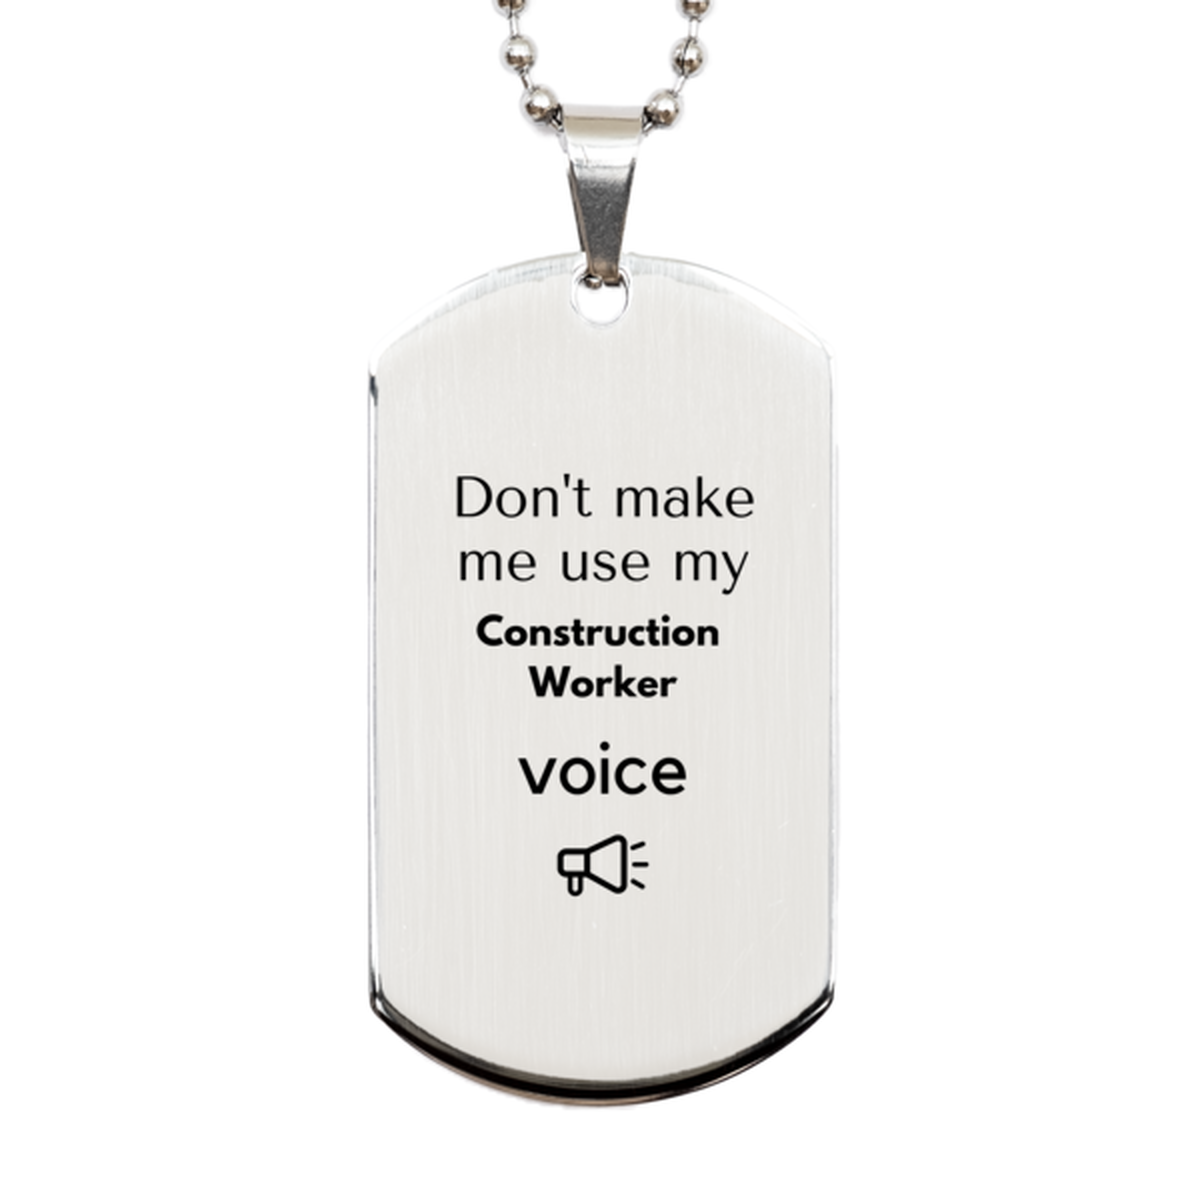 Don't make me use my Construction Worker voice, Sarcasm Construction Worker Gifts, Christmas Construction Worker Silver Dog Tag Birthday Unique Gifts For Construction Worker Coworkers, Men, Women, Colleague, Friends